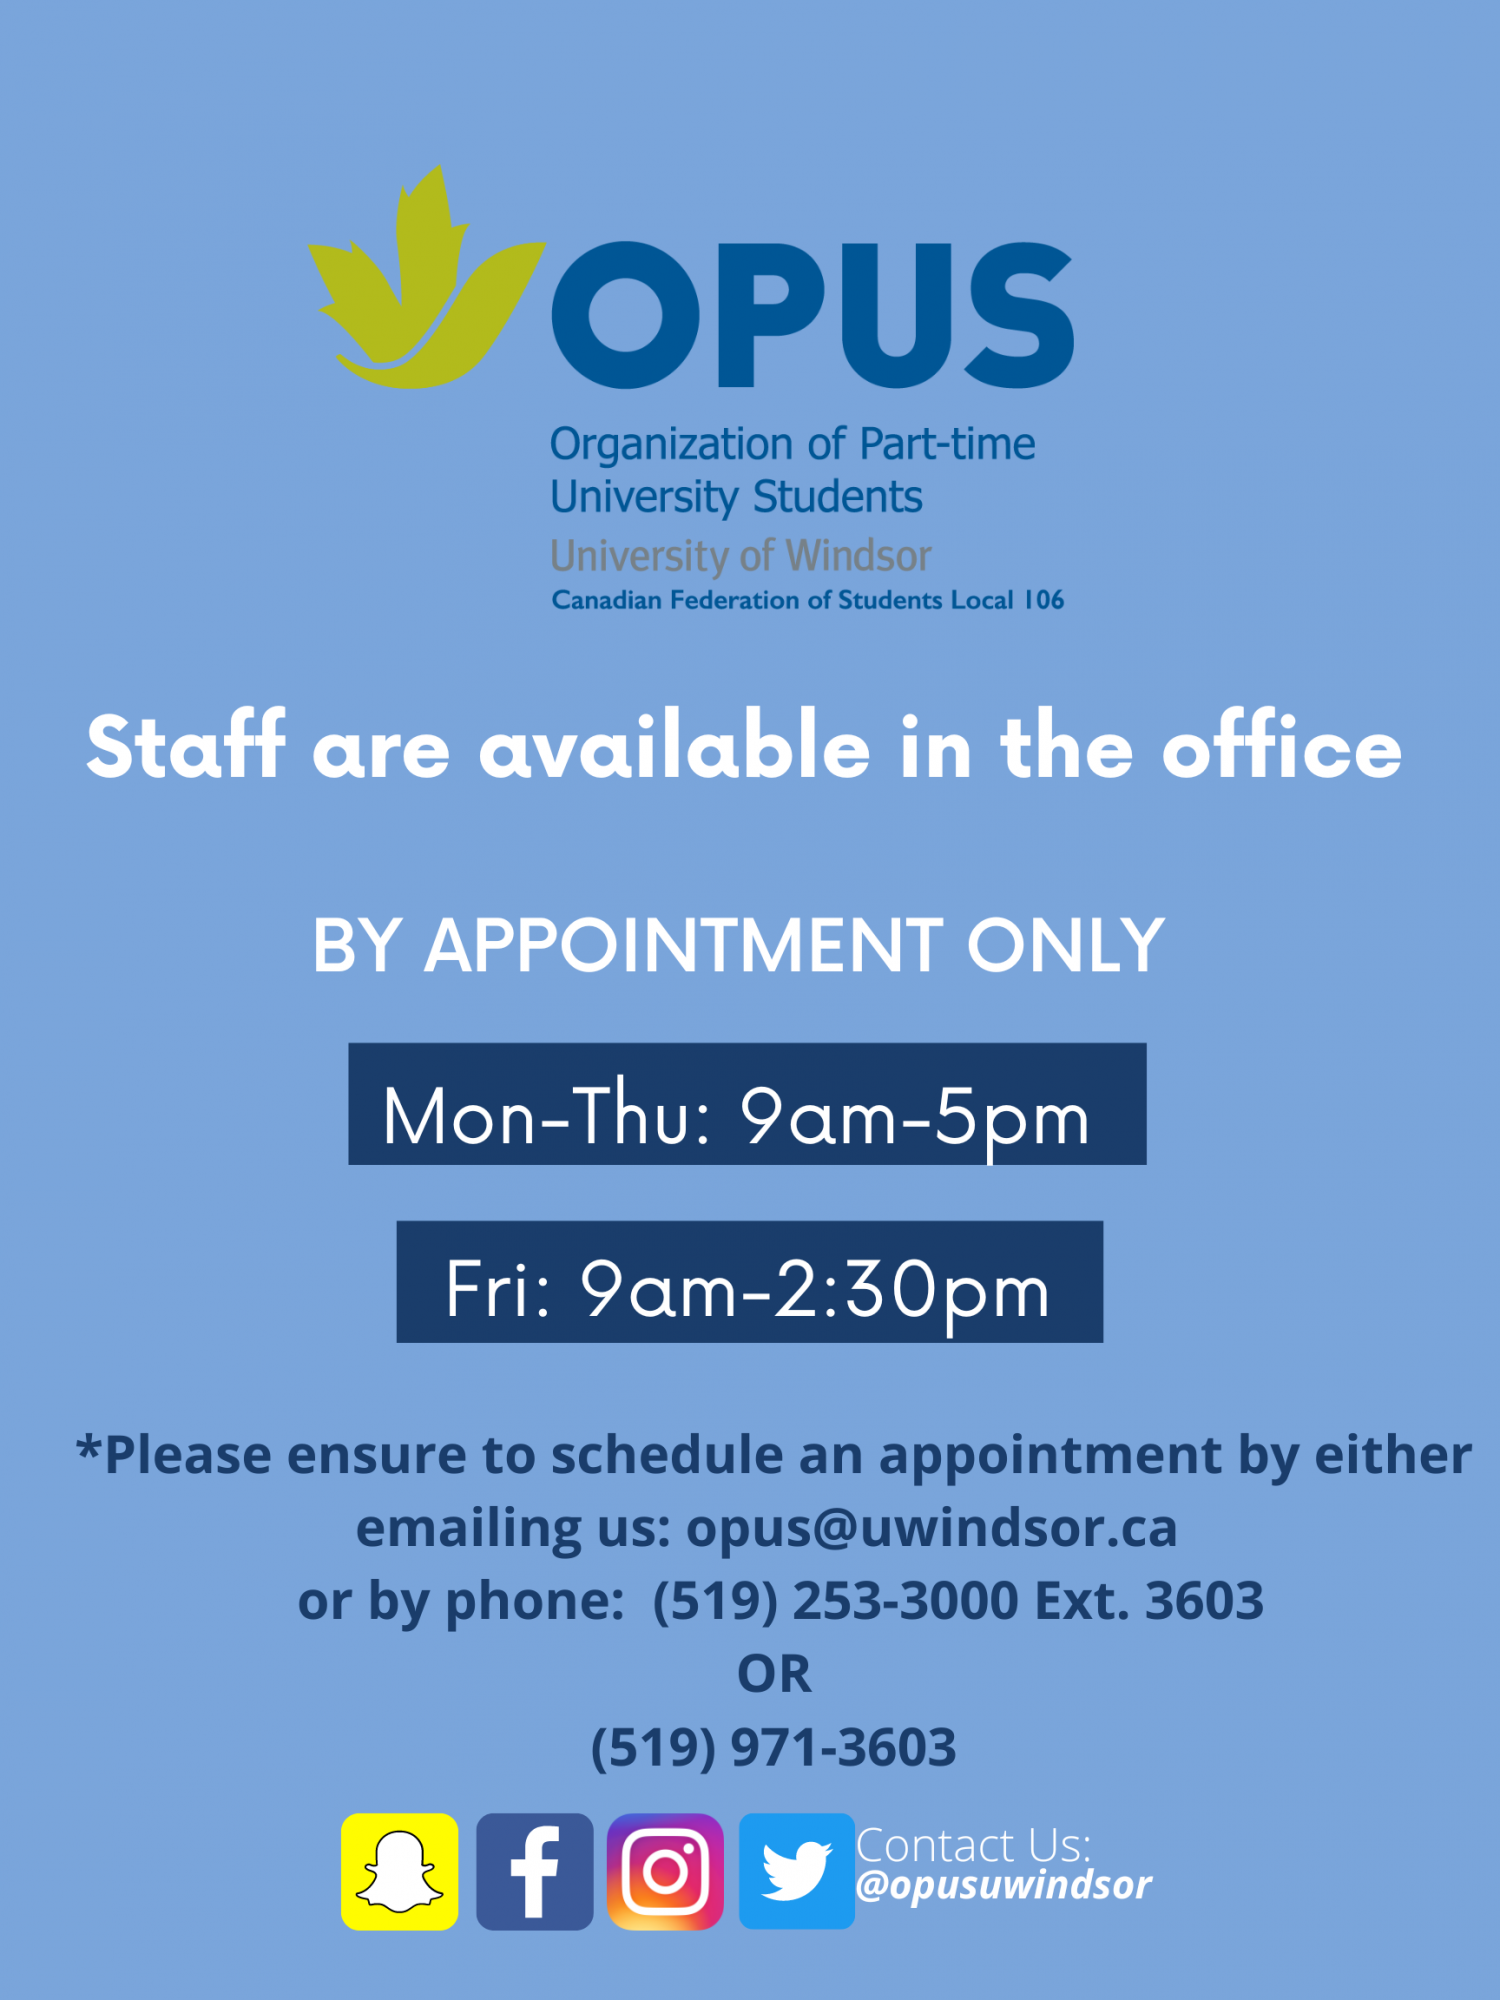 OPUS office working hours image